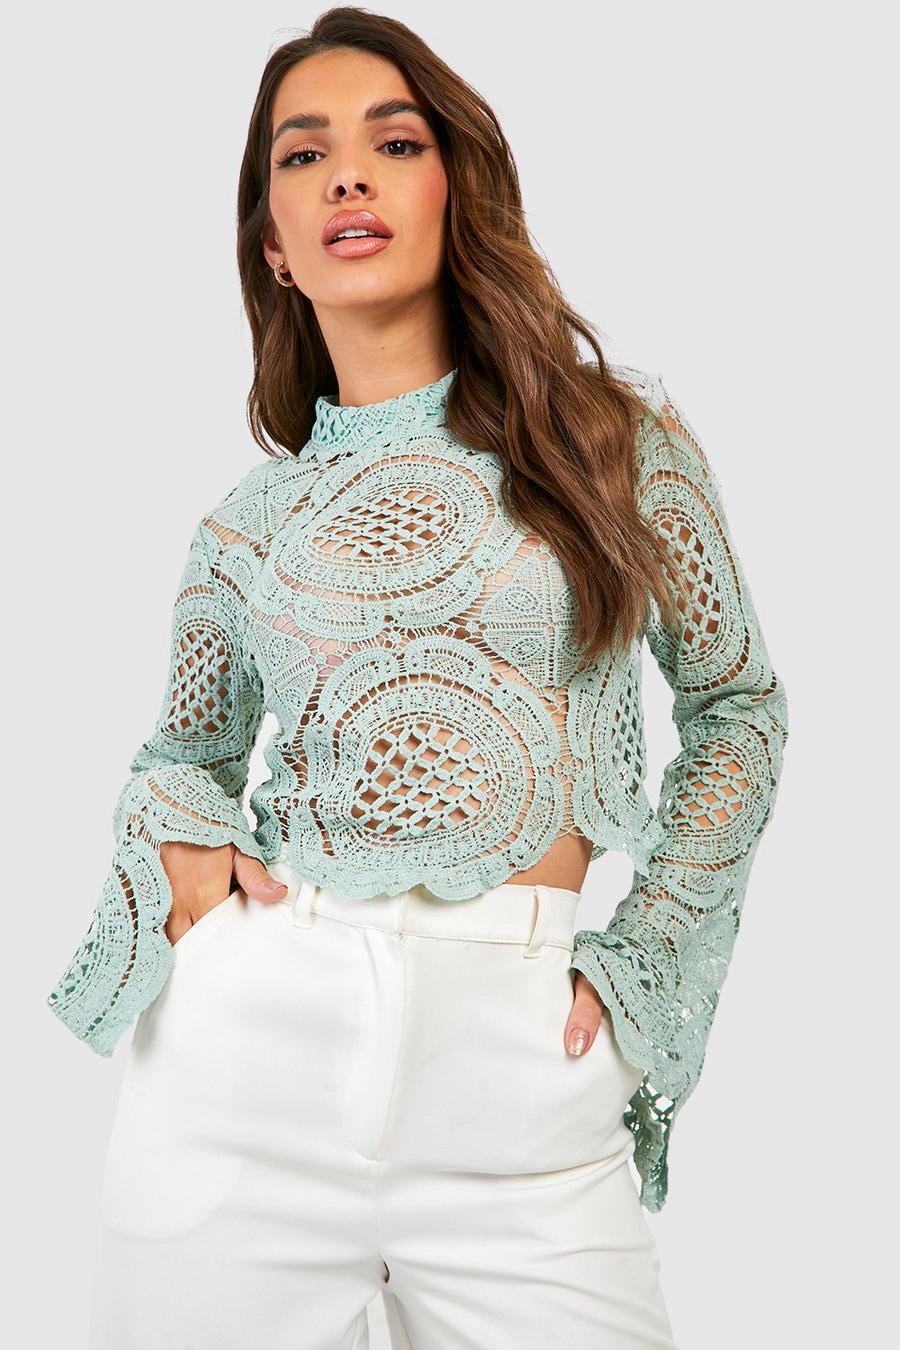 Lace | Lace Tops for Women boohoo USA